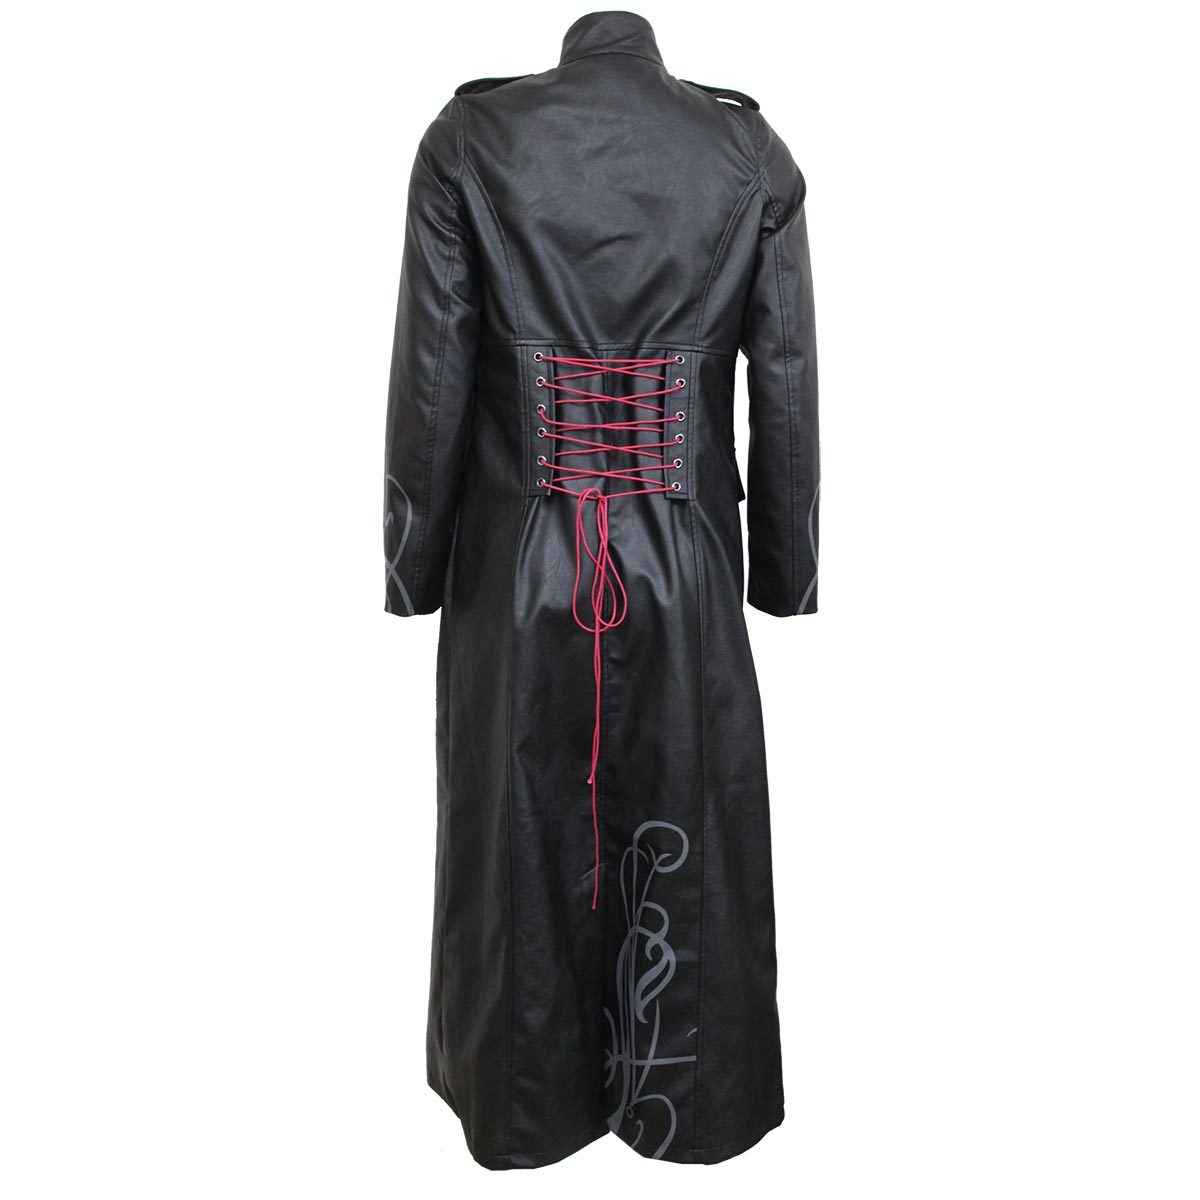 JUST TRIBAL - Gothic Trench Coat PU-Leather Corset Back - Spiral USA